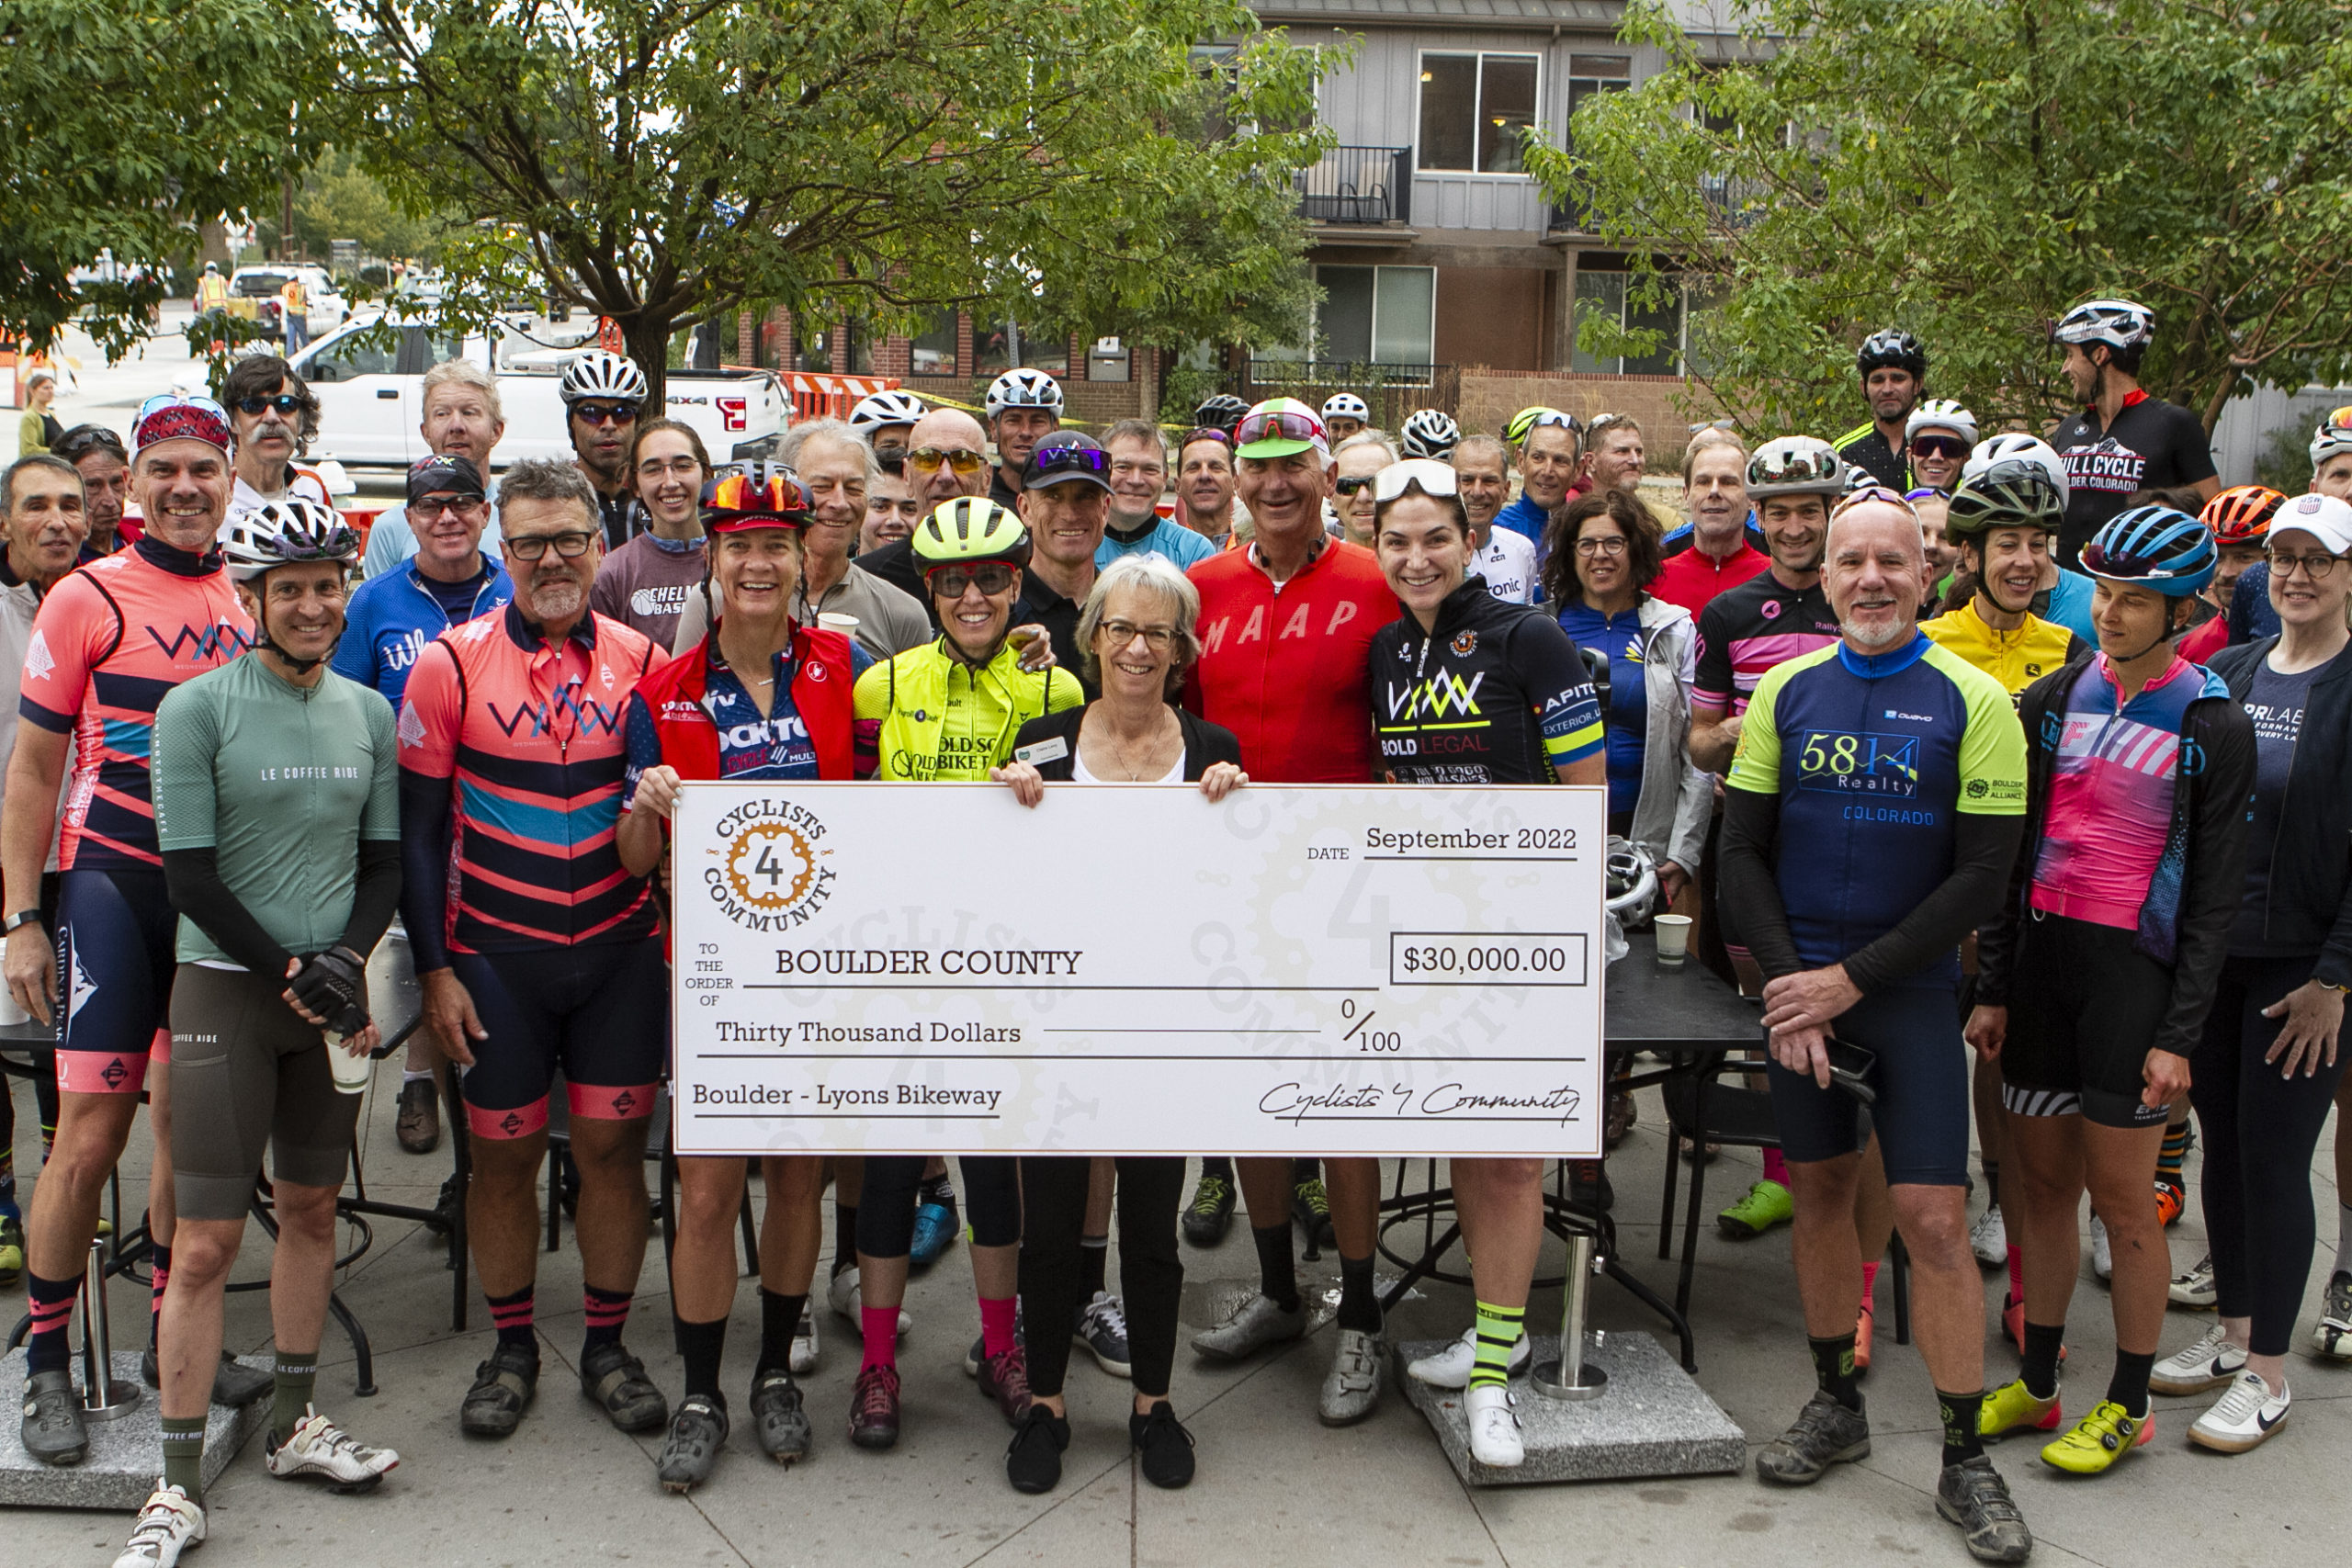 Cyclists 4 Community Draft 2024 Program Service and Fundraising Goals